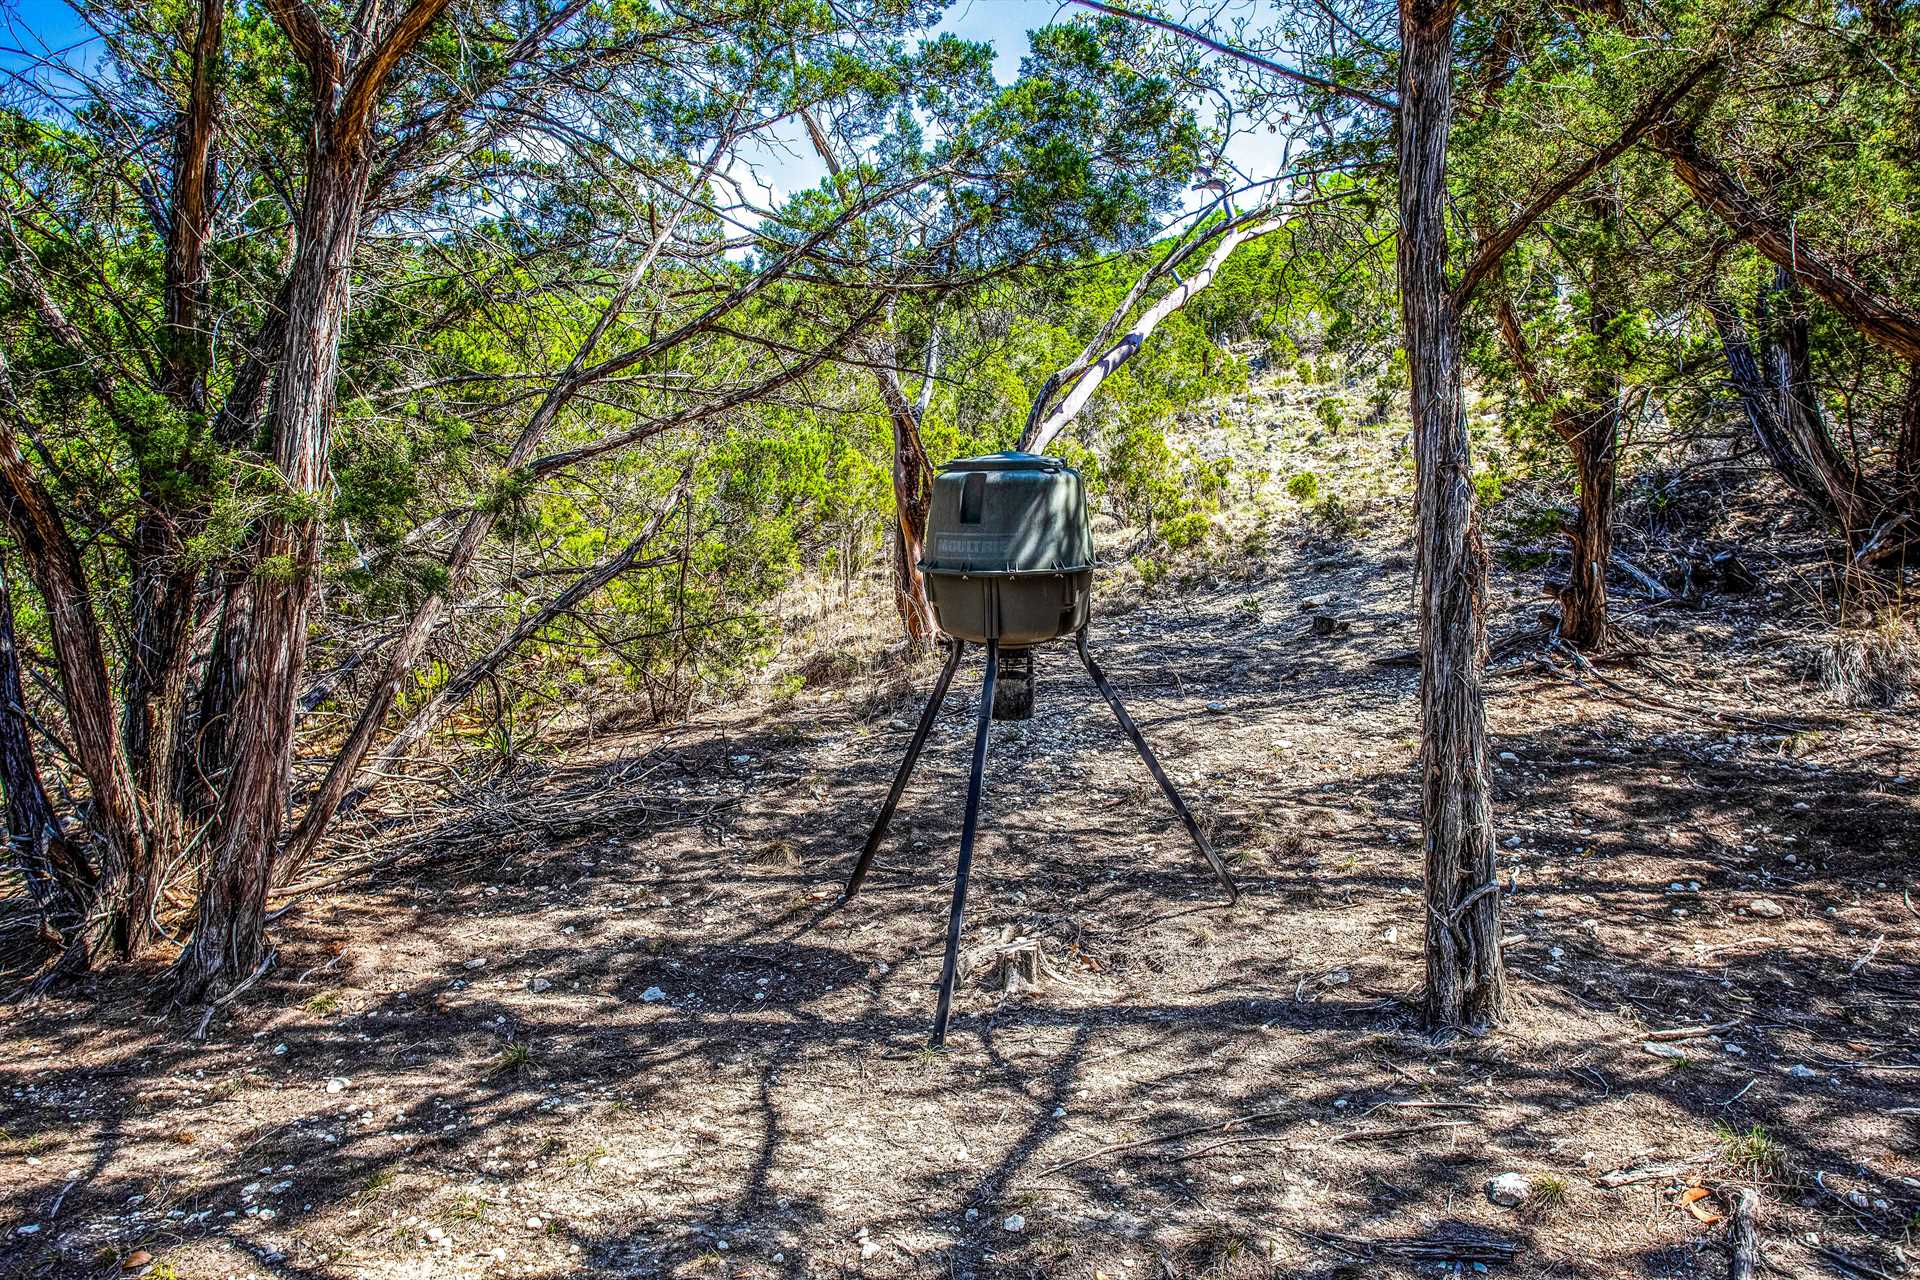                                                 A deer feeder near the Casita draws them by for a tasty snack! Lots of other birds and wildlife like to gather here, too.